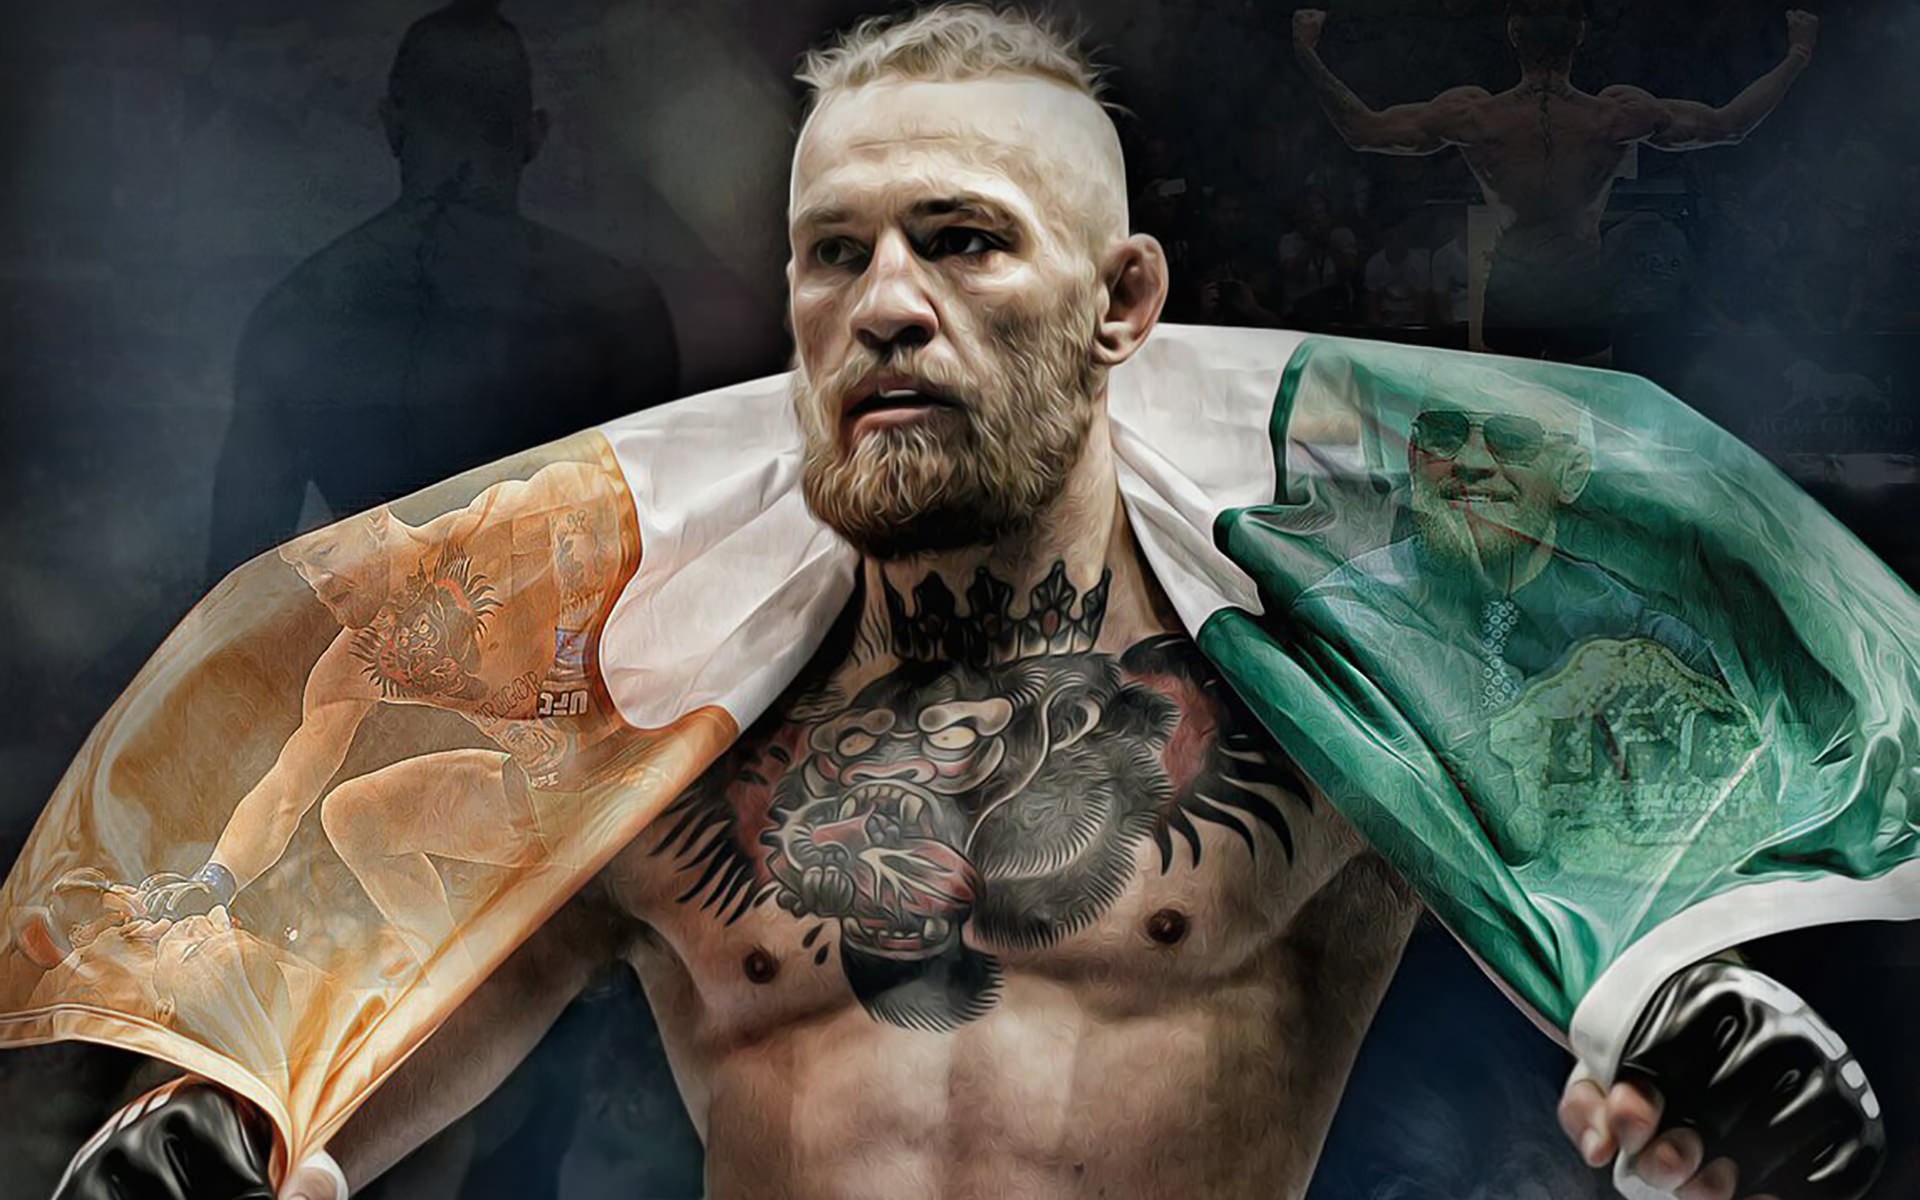 Conor McGregor wallpaper ·① Download free full HD wallpapers of Conor